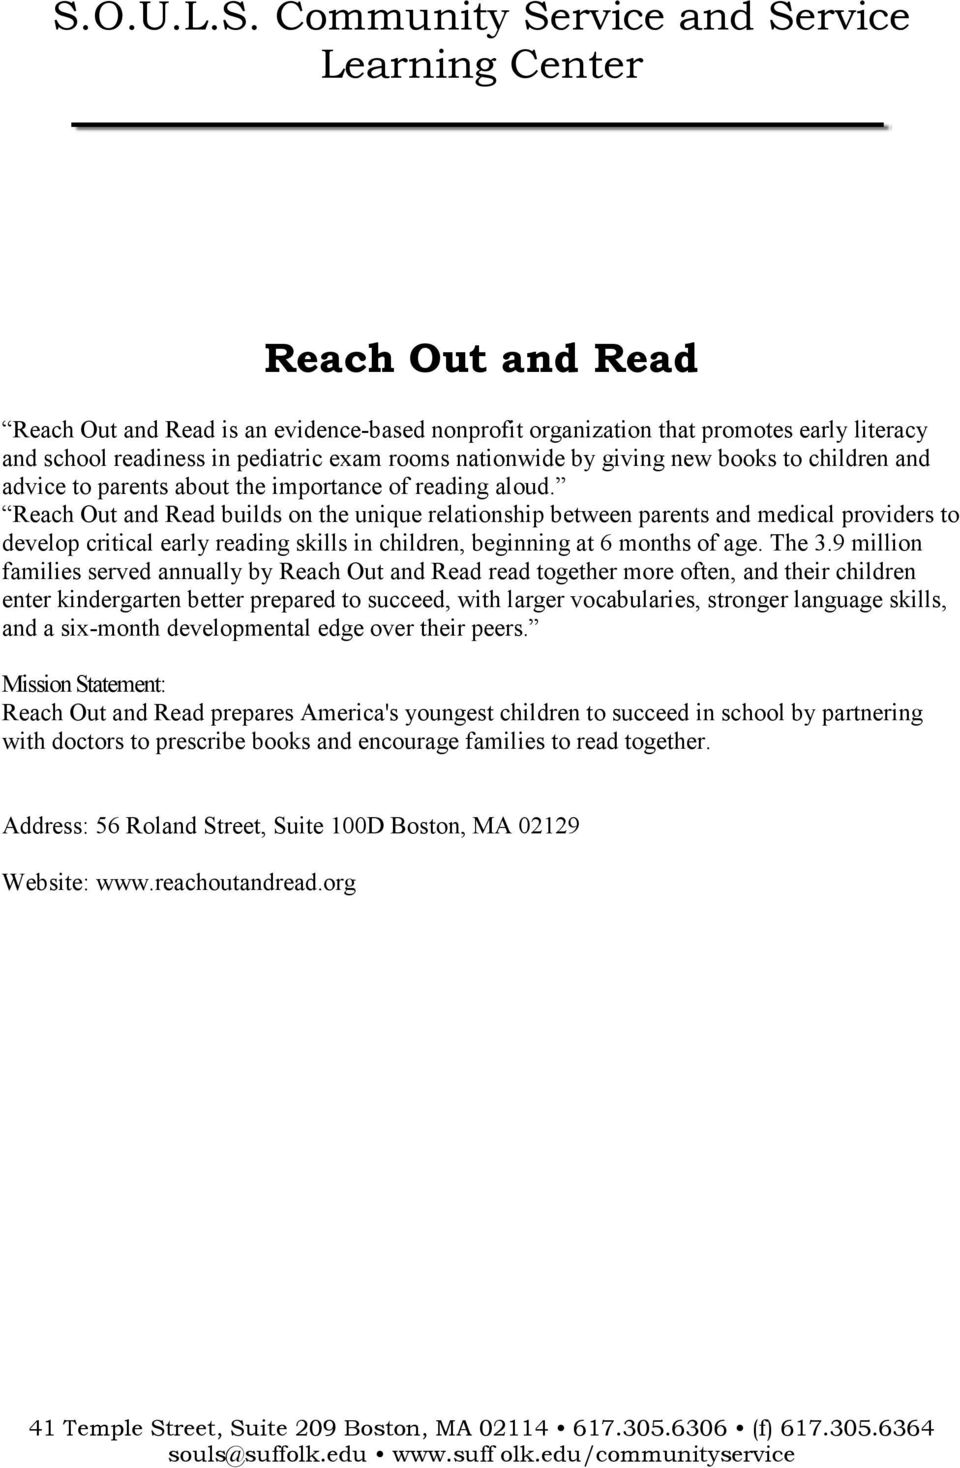 Reach Out and Read builds on the unique relationship between parents and medical providers to develop critical early reading skills in children, beginning at 6 months of age. The 3.